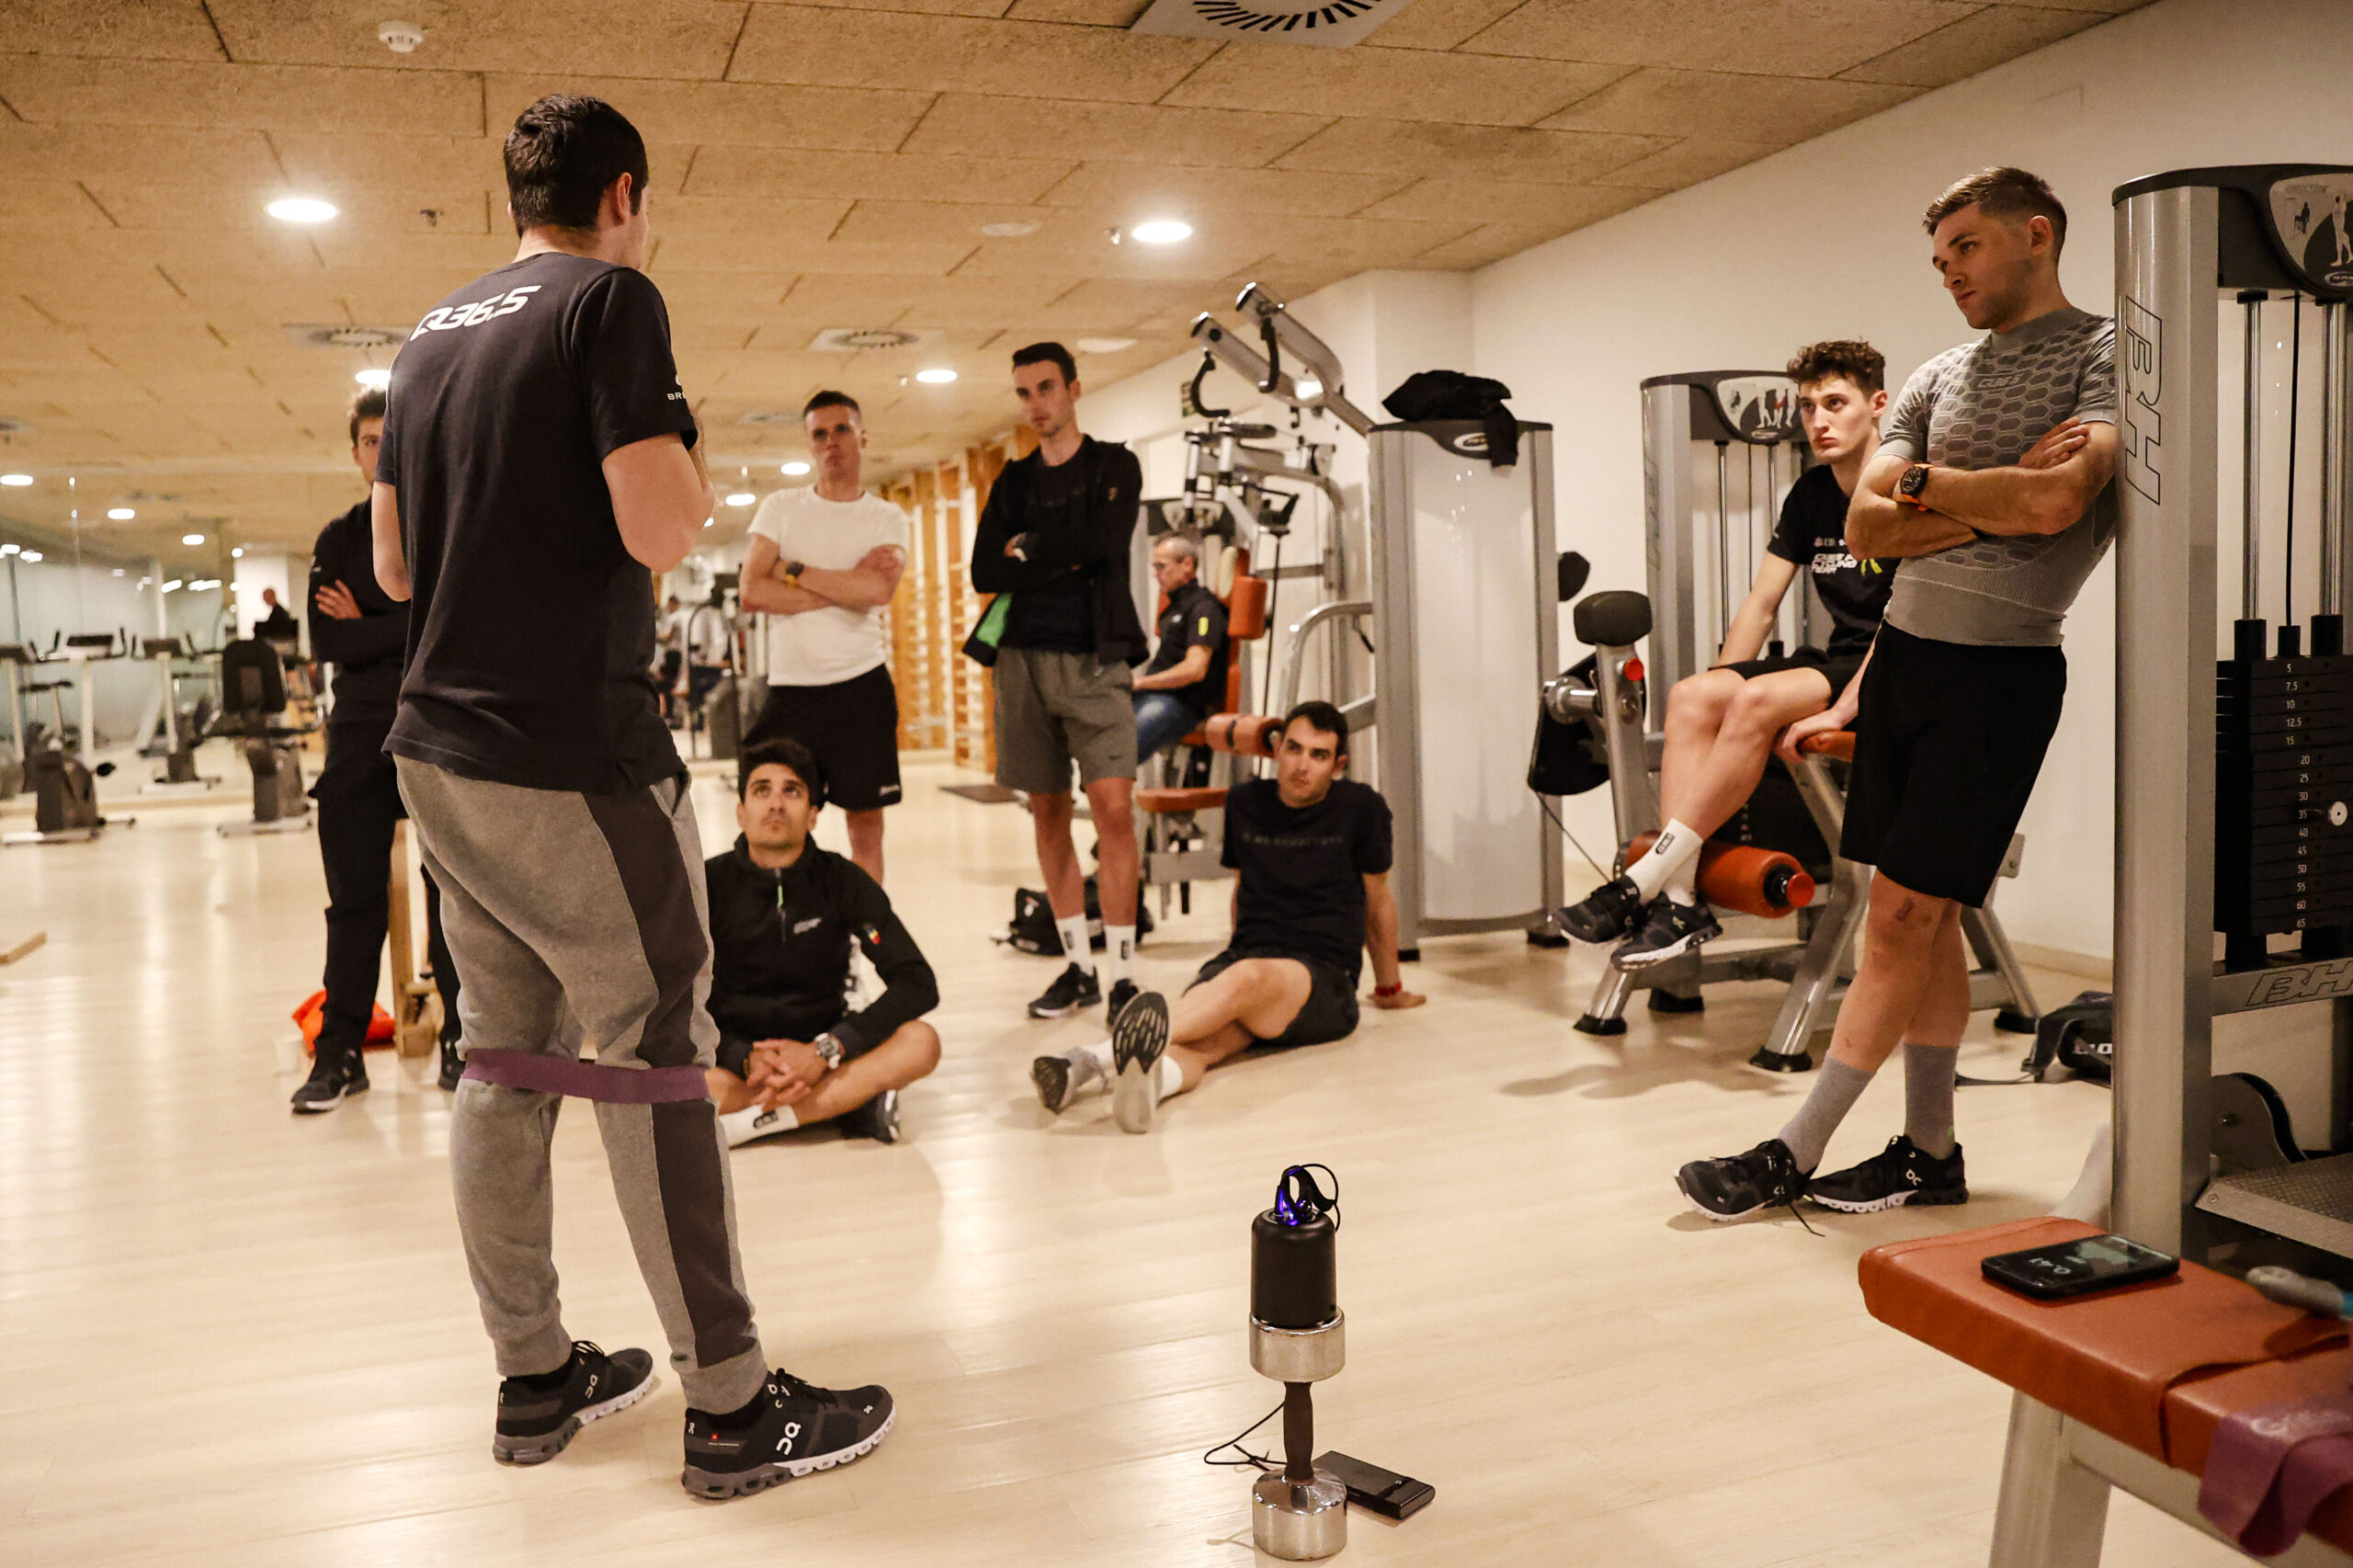 Carles Tur, Head Coach of Q36.5 Pro Cycling Team, briefing a group of cyclists in the gym before a workout session.